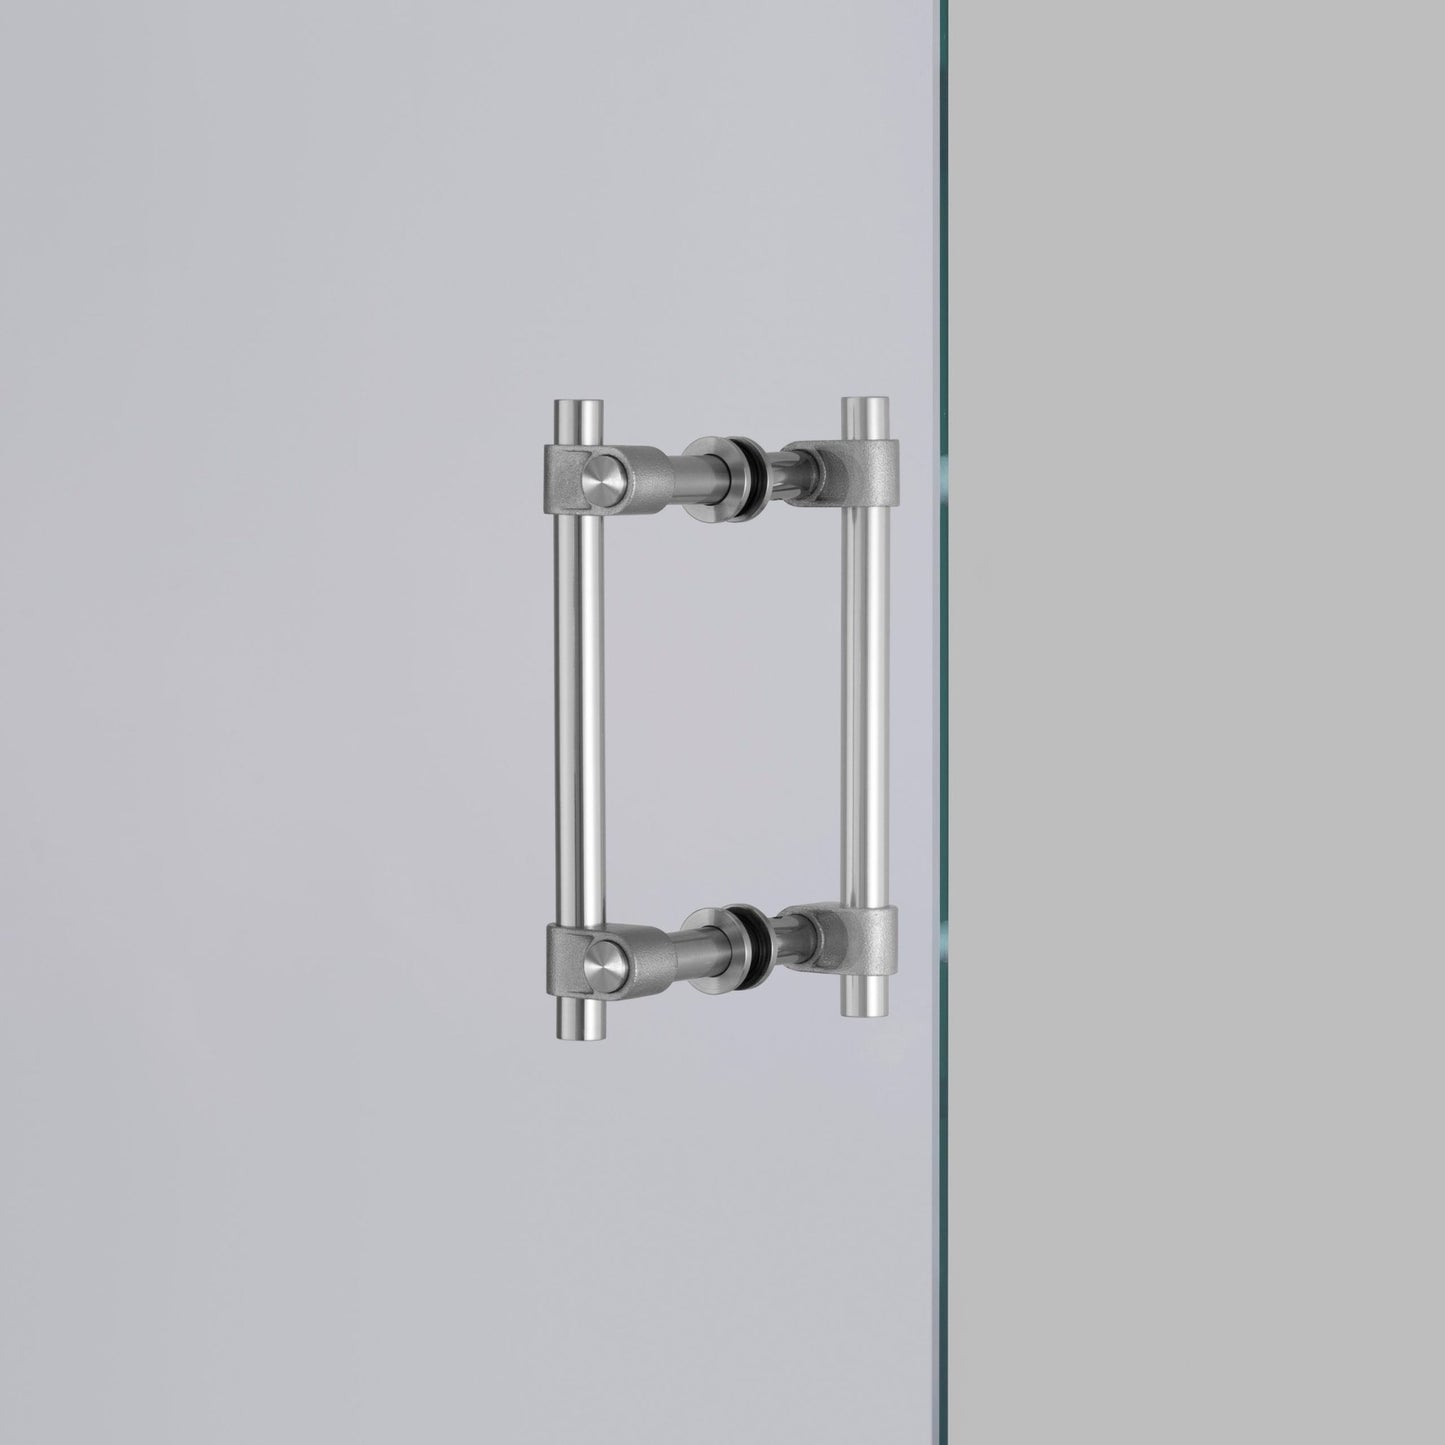 Solid Double-Sided Pull Bar Stainless Steel - |VESIMI Design| Luxury and Rustic bathrooms online